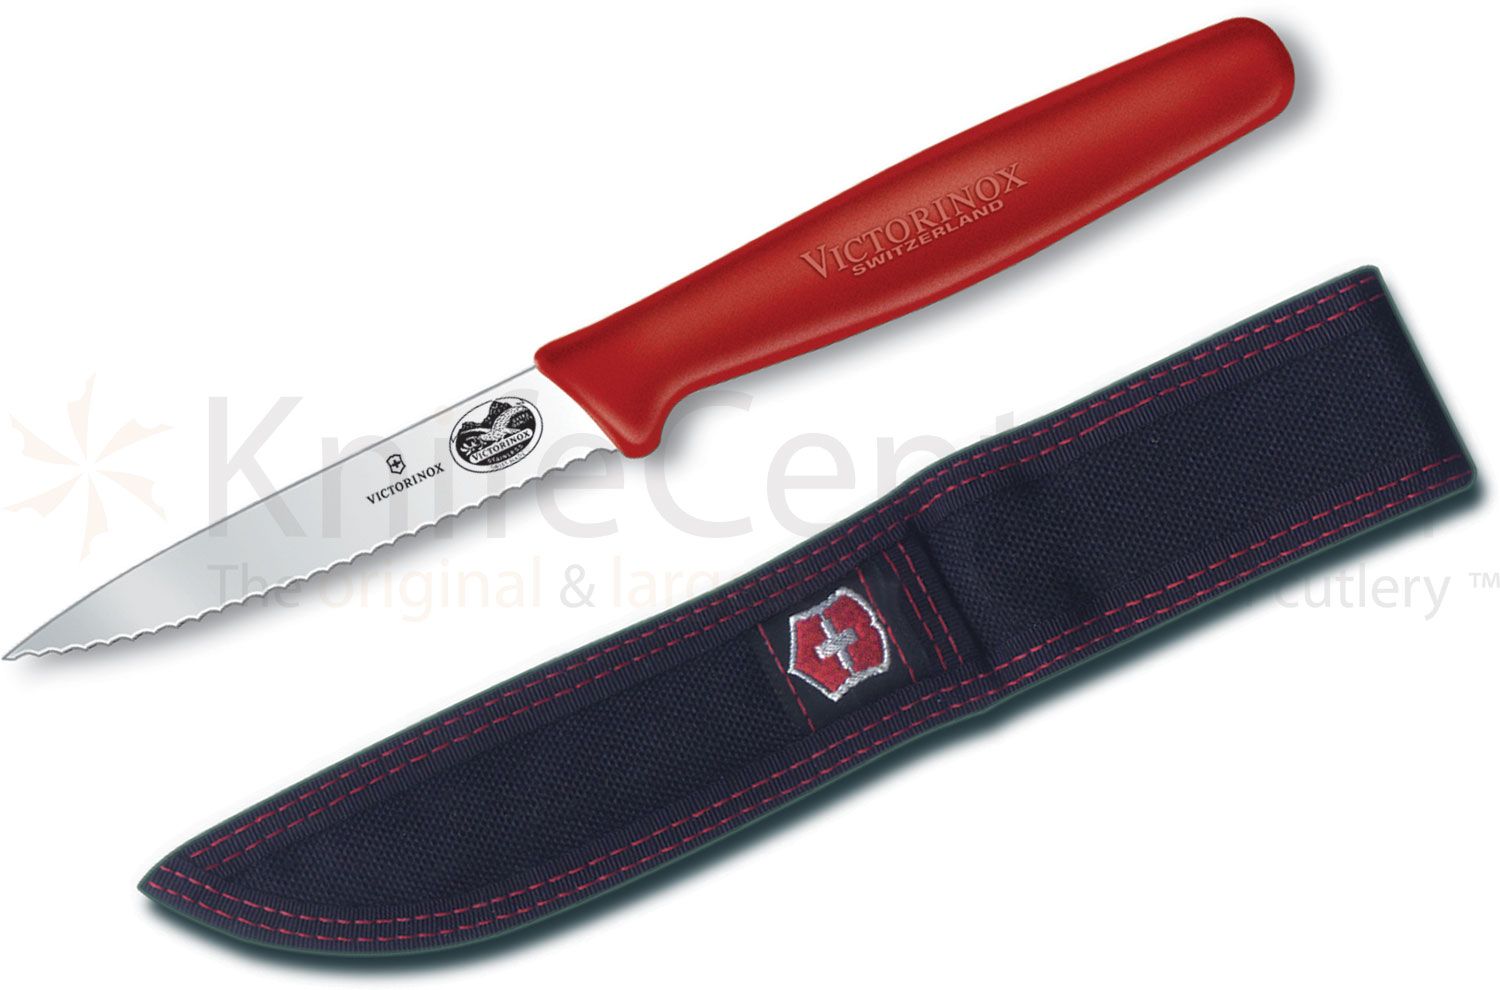 Victorinox - 6.7637 - 3 1/4 in White Serrated Paring Knife